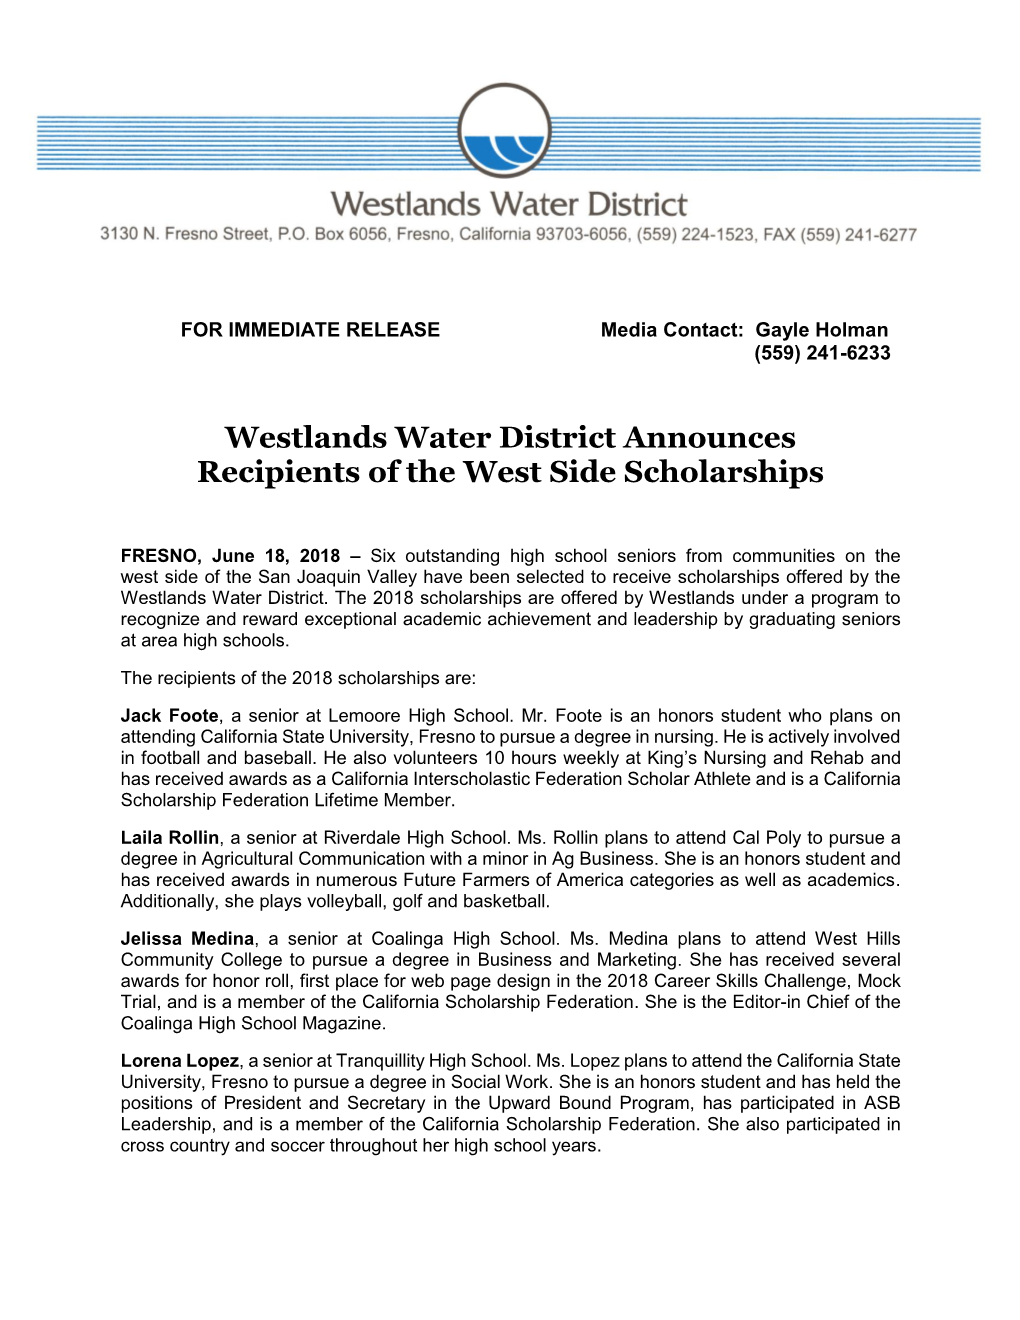 Westlands Water District Announces Recipients of the West Side Scholarships